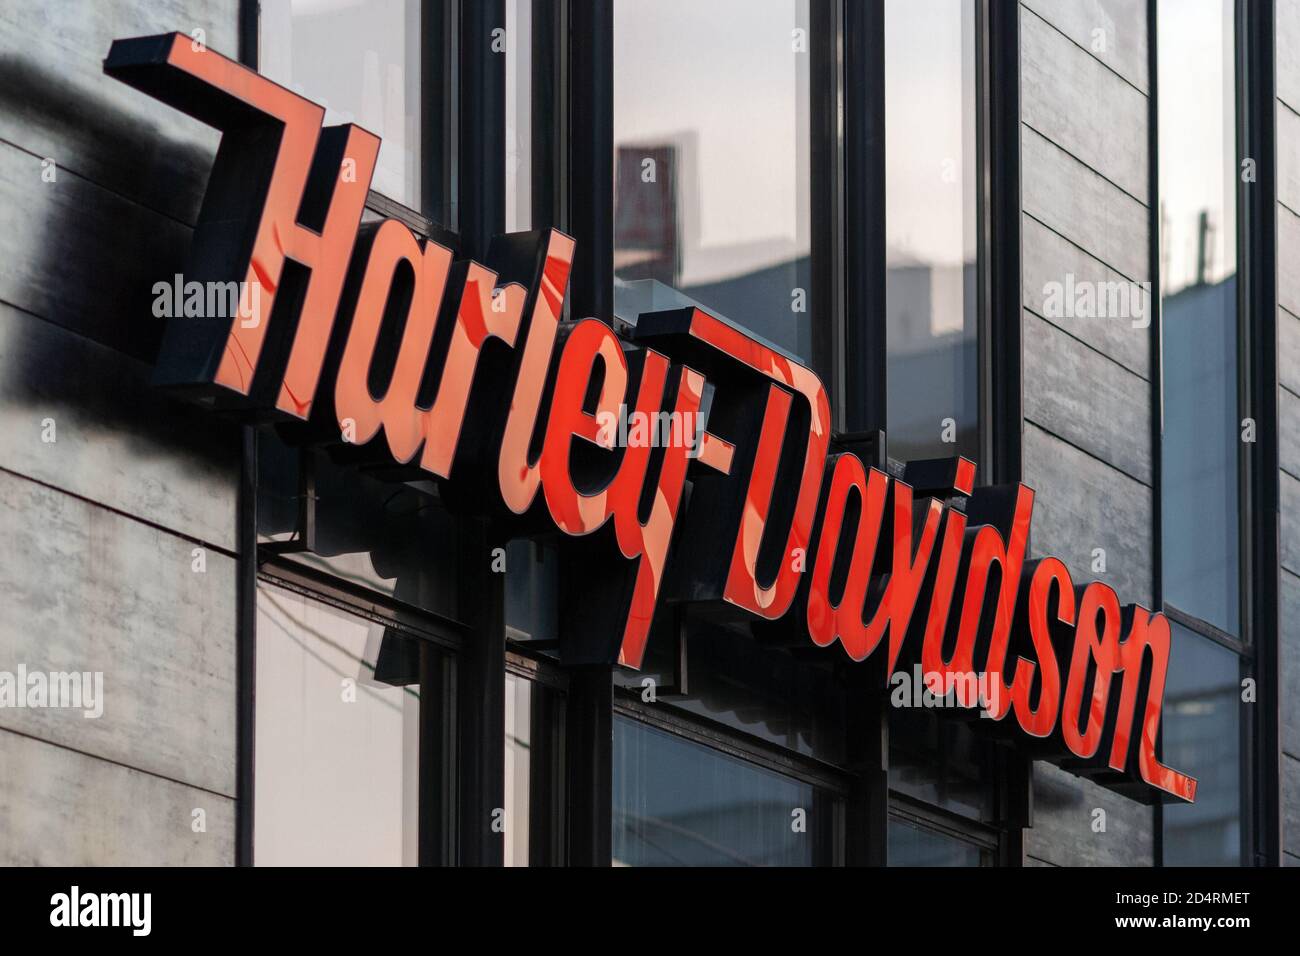 Harley Davidson logo on office building facade close up, Moscow 05/10/2020 Stock Photo